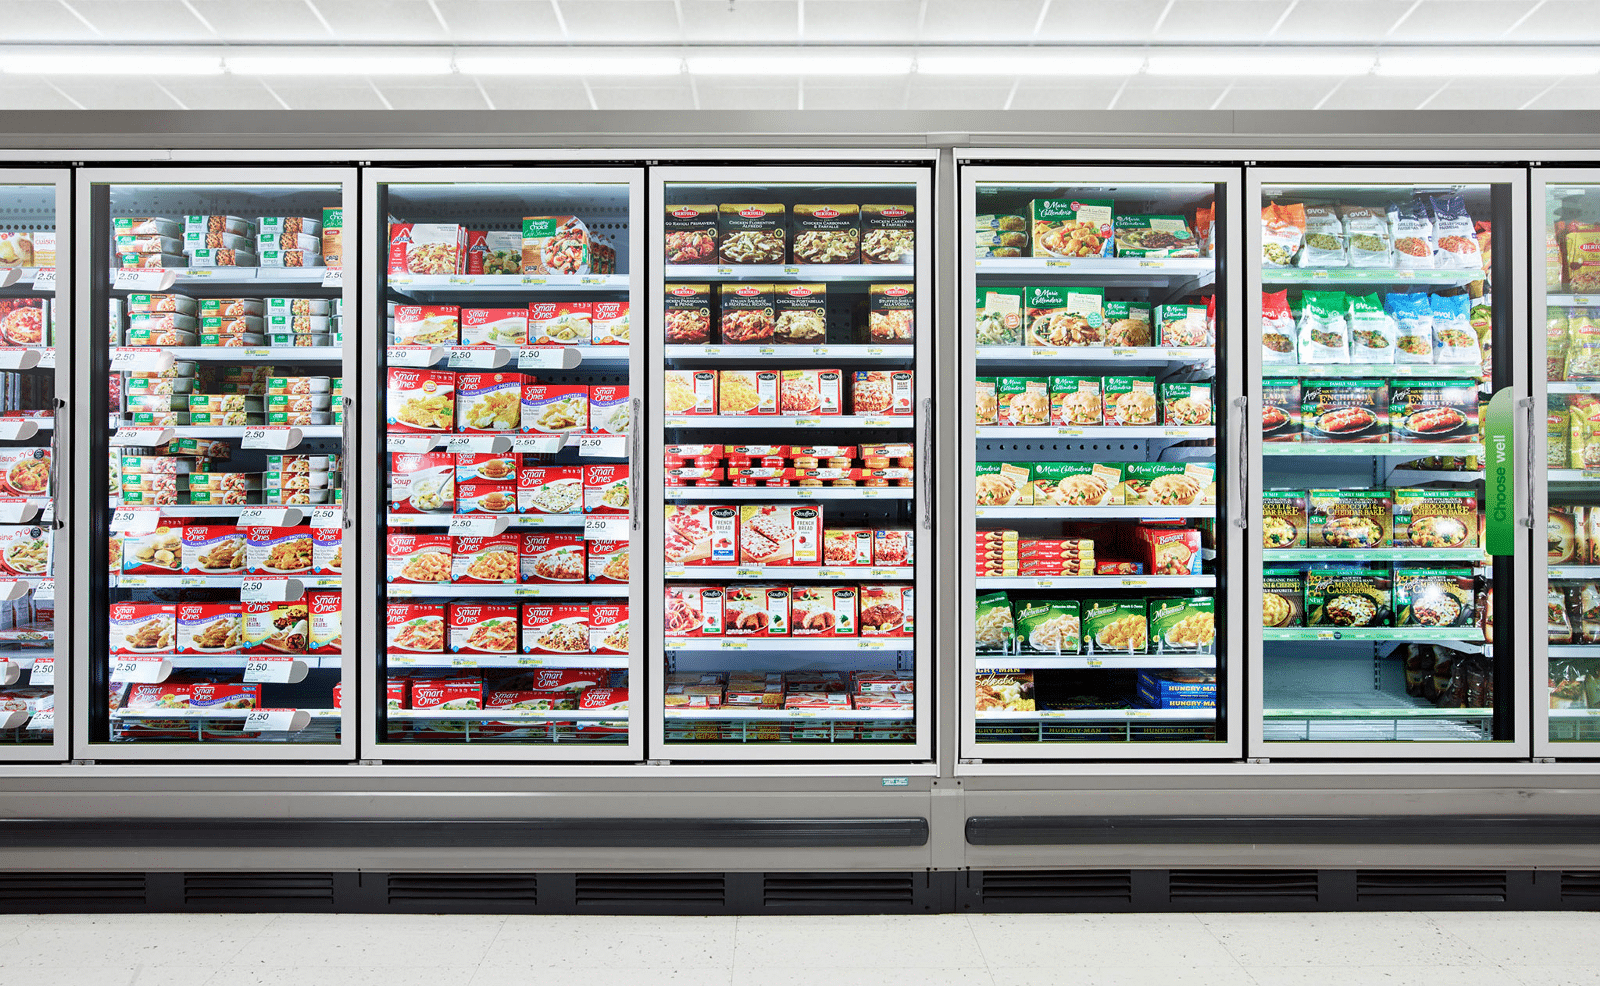 A picture of a refrigerated aisle at a grocery or convenience stores. Glass clad cooler cases showcase the food inside.